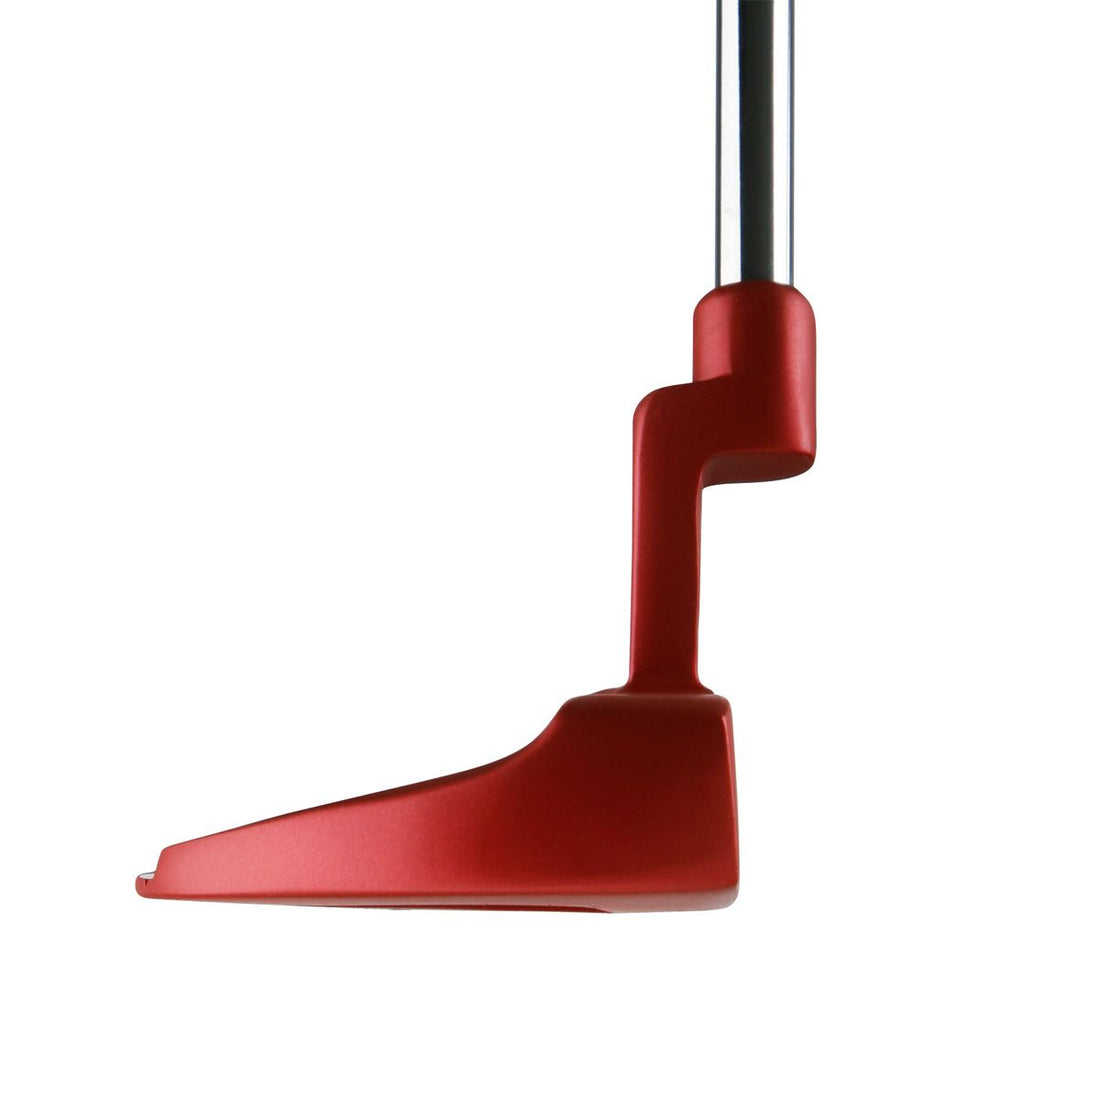 toe view of a red Orlimar Tangent T1 Mallet Putter with 3 degrees of loft